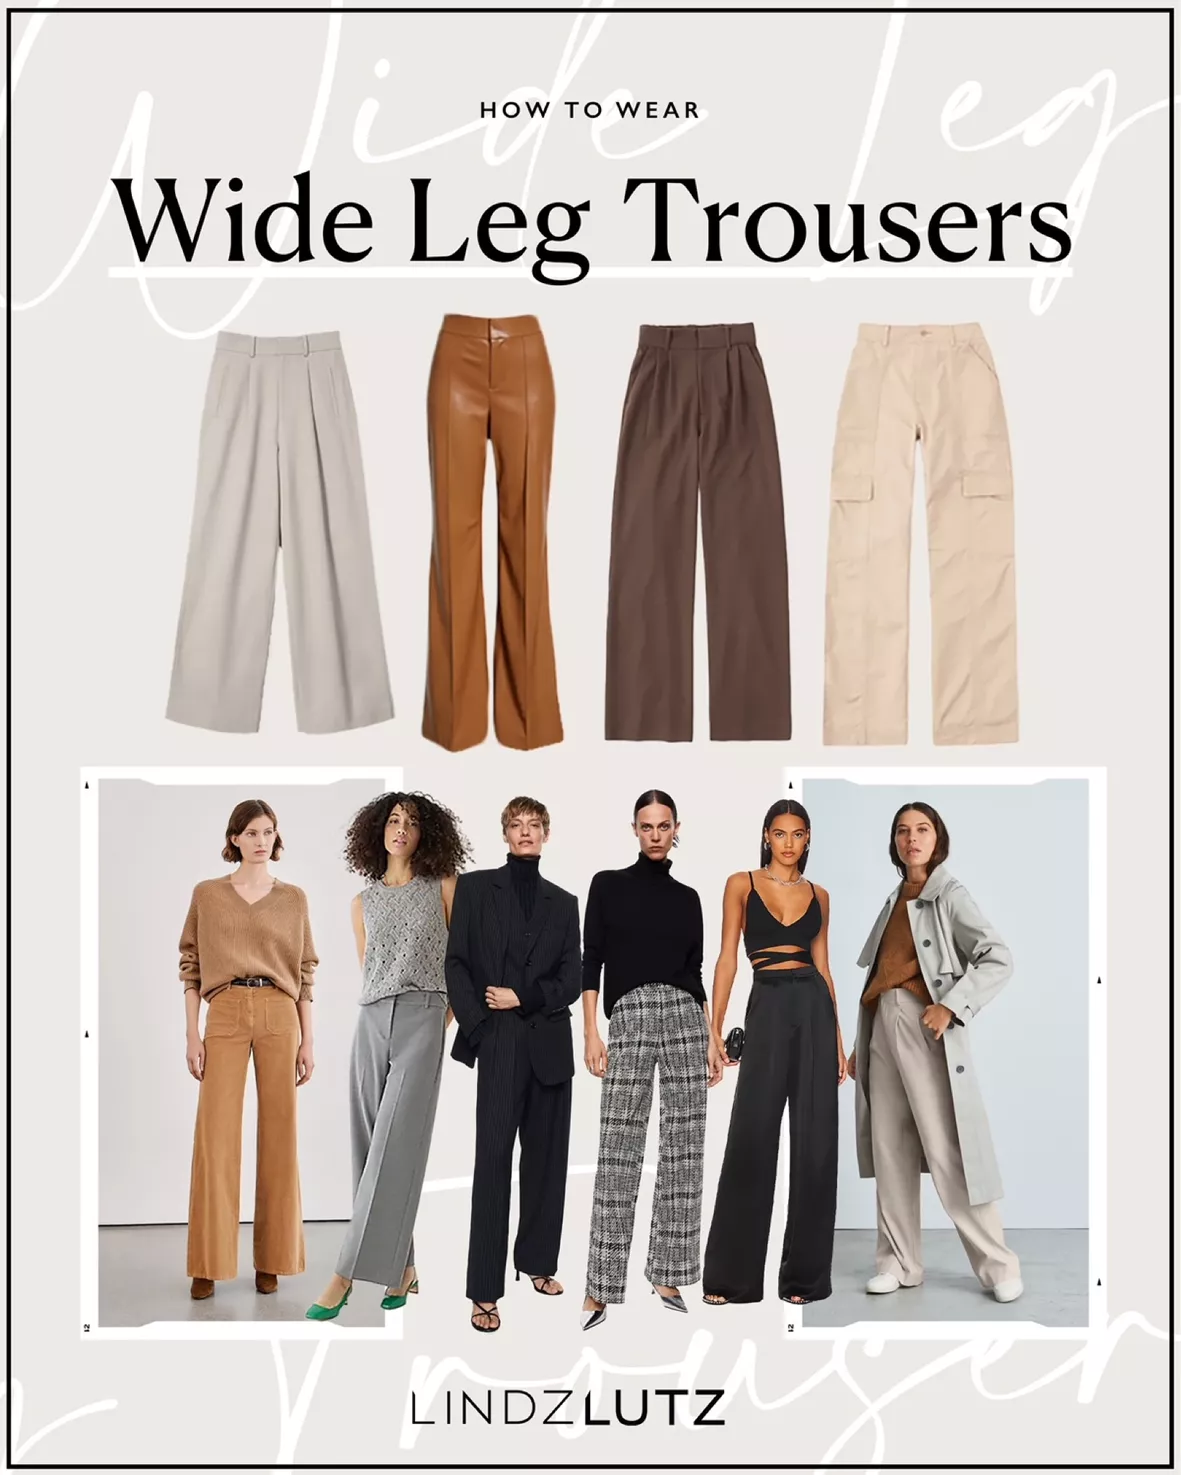 How to wear wide leg pants for women over 40 - fashion for women